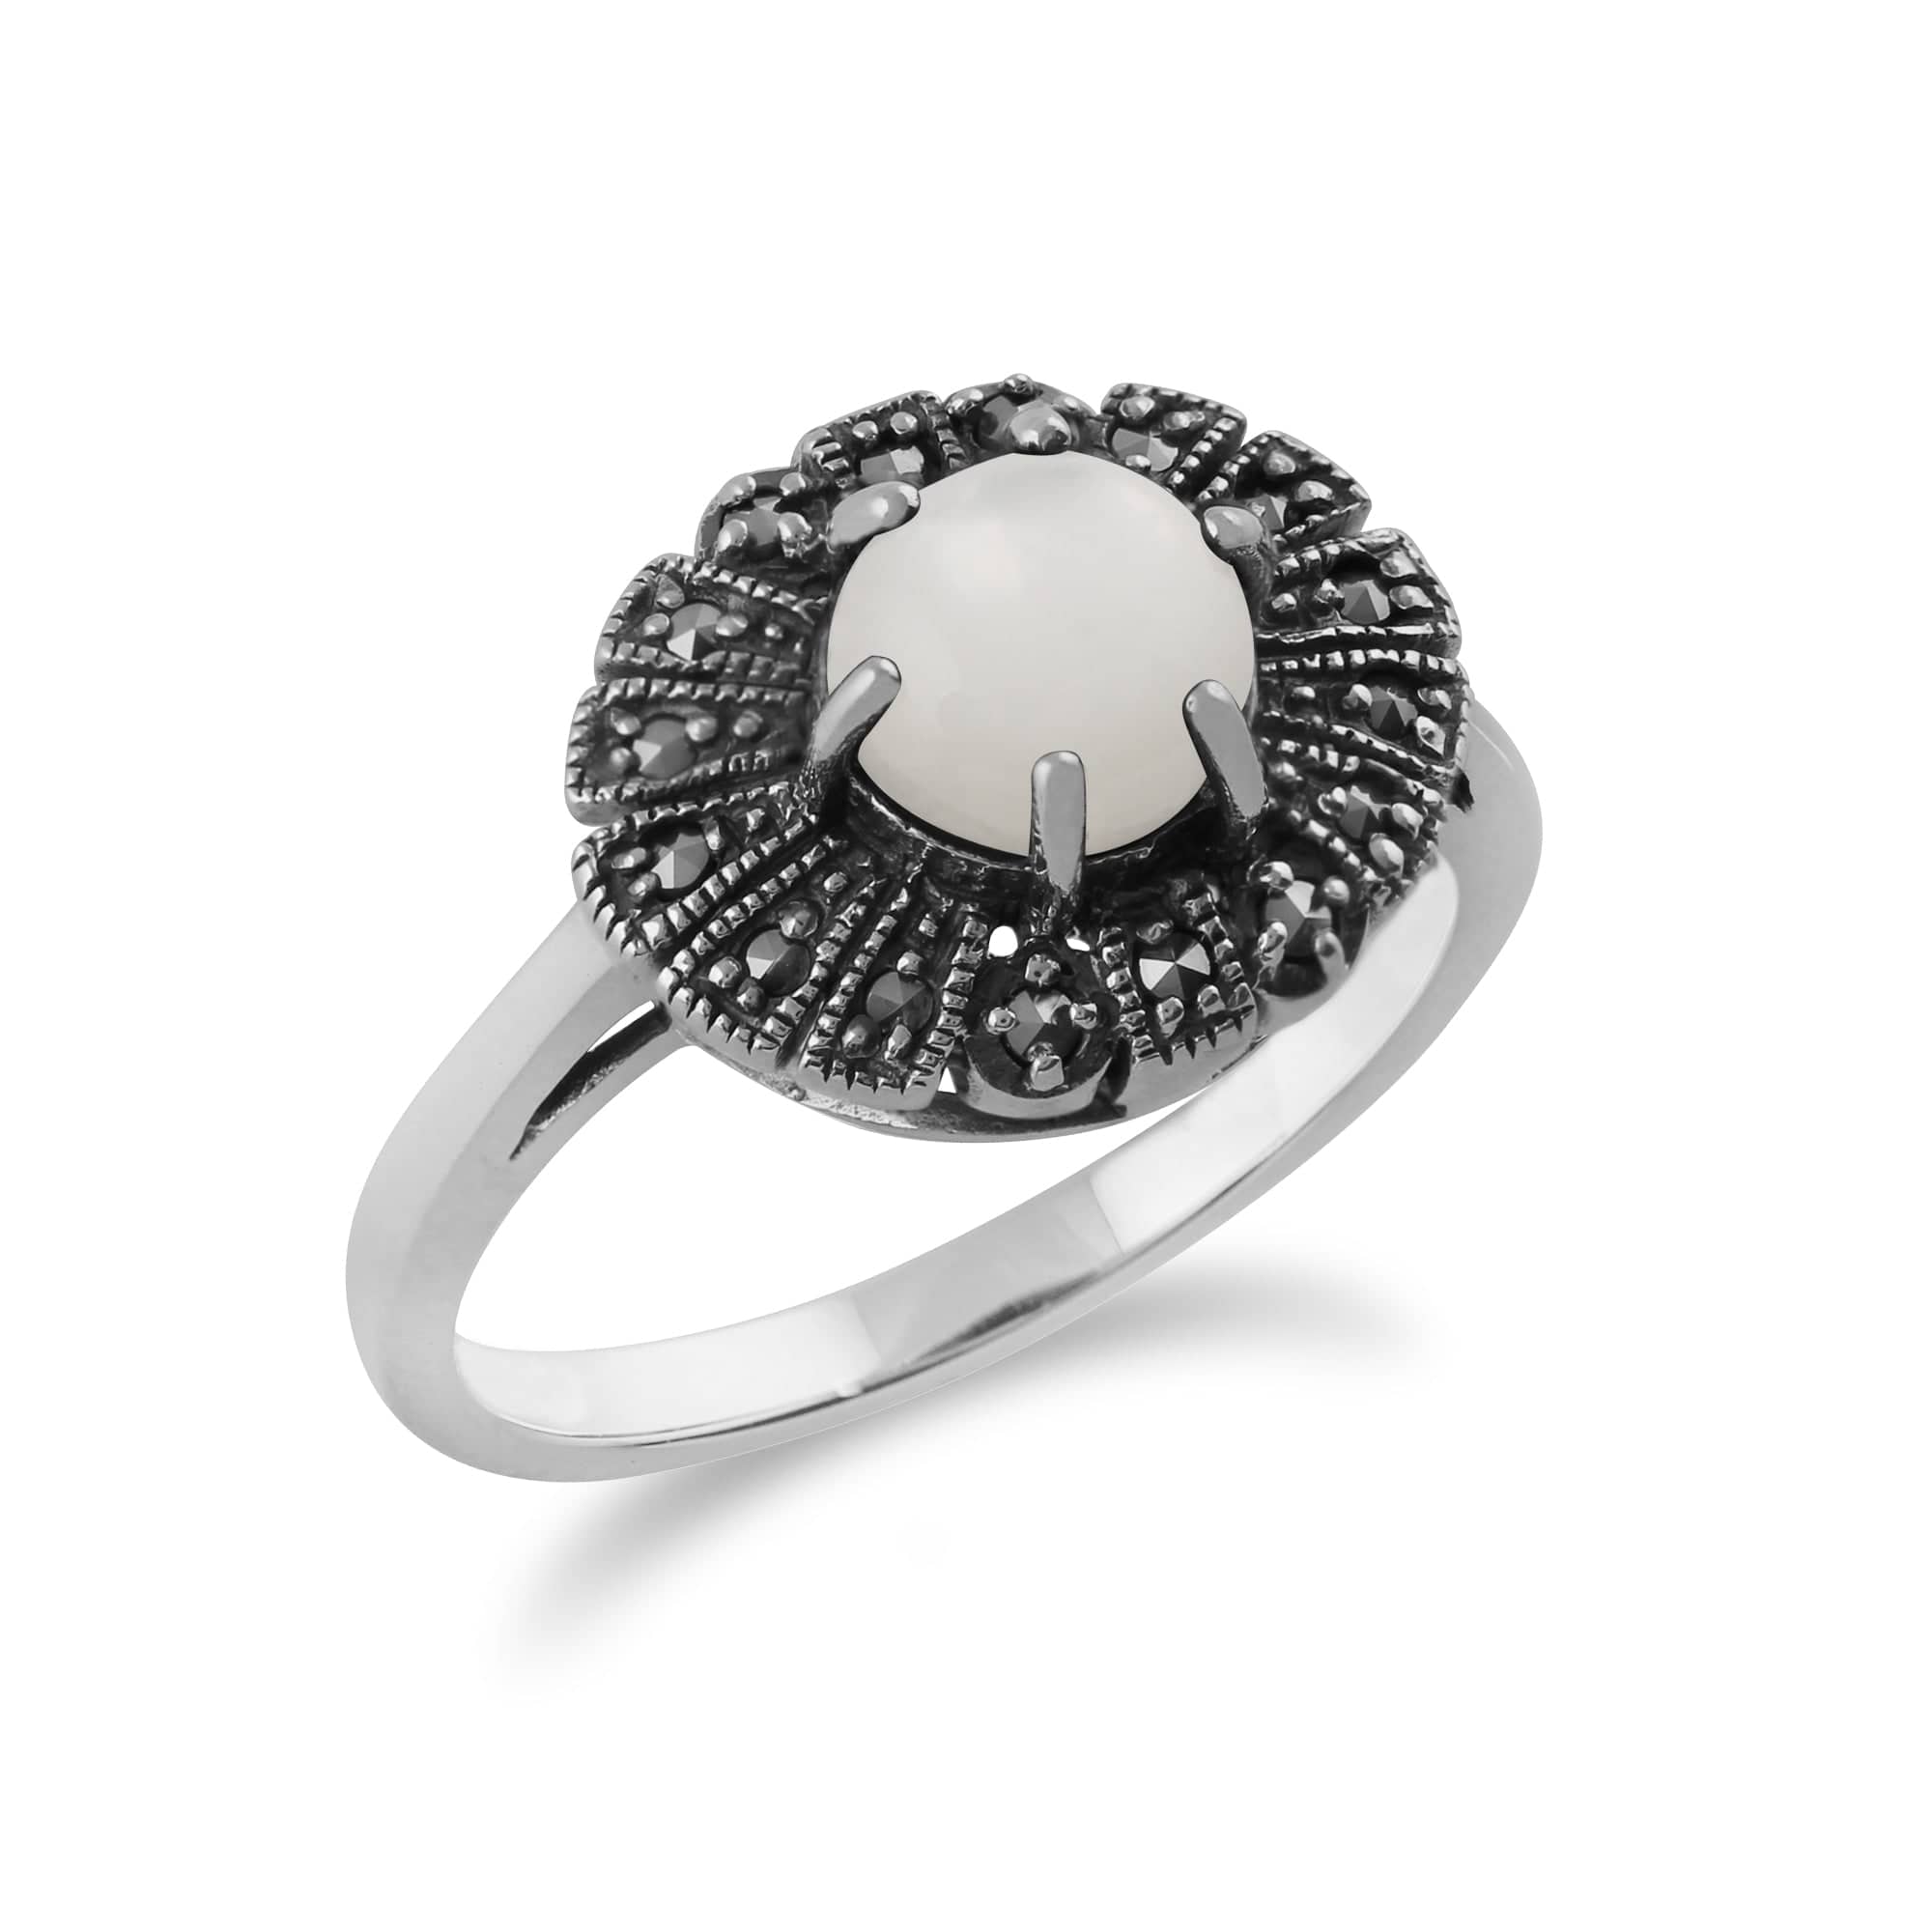 Gemondo 925 Sterling Silver 0.85ct Mother of Pearl & Marcasite Art Deco Ring Image 2